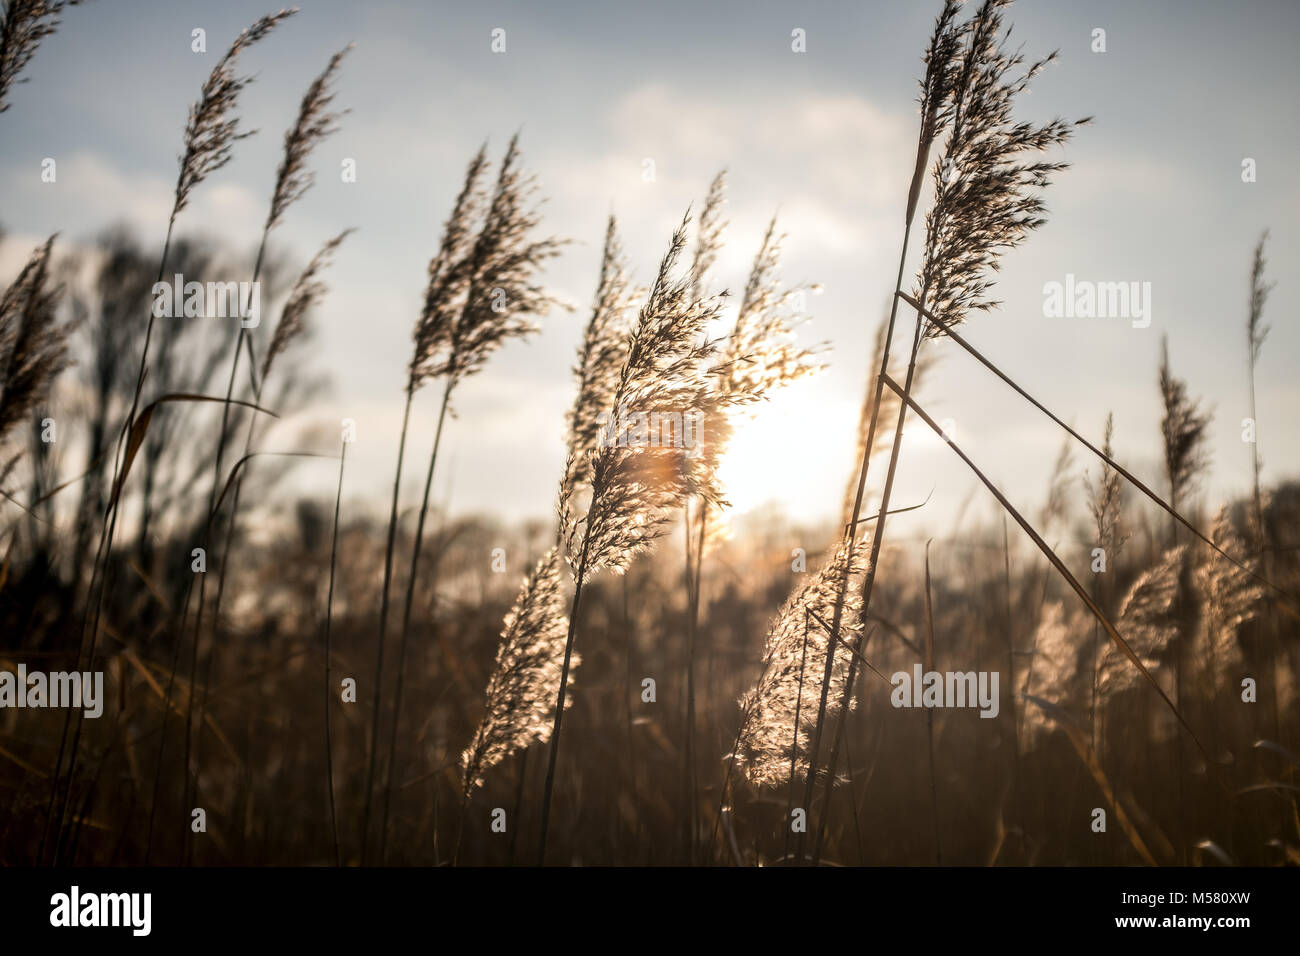 Detail of common reed in the backlight of the evening sun. Stock Photo